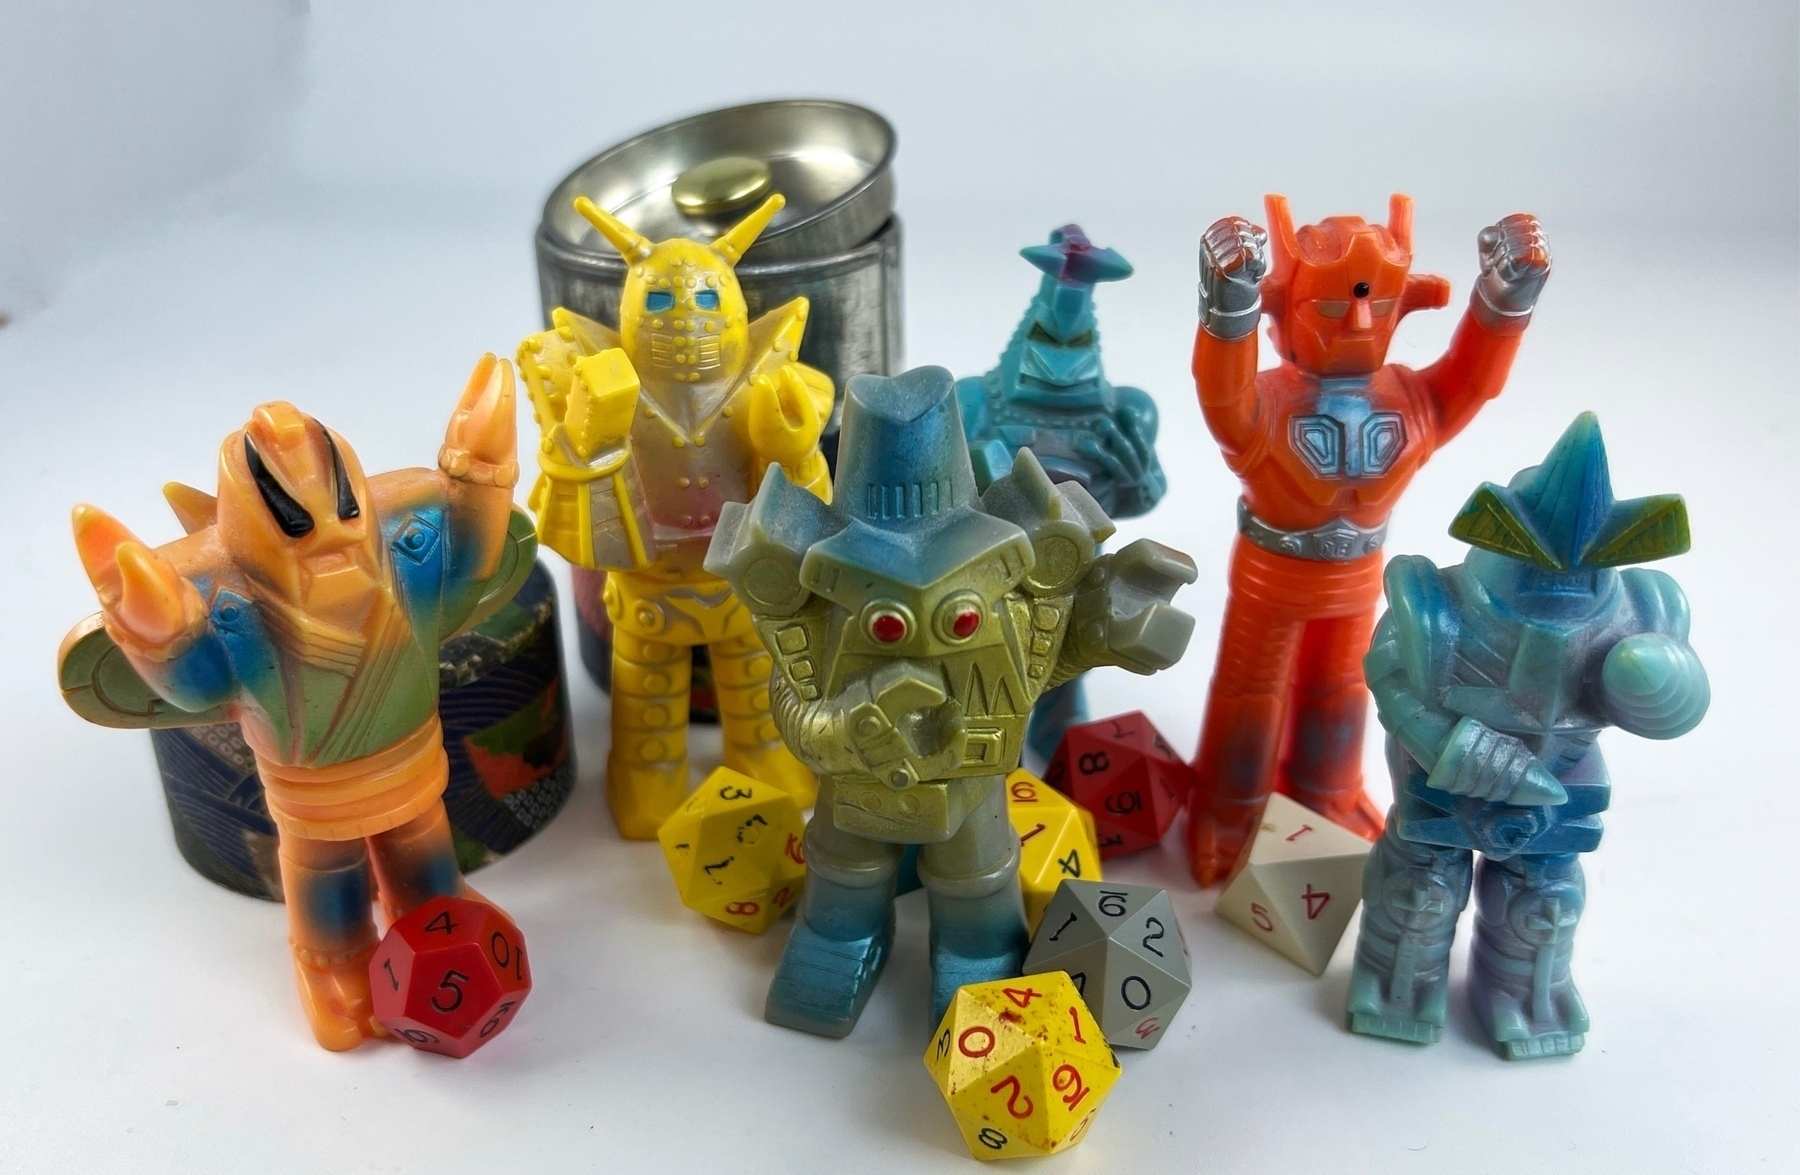 a set of soft vinyl robots from a Japanese TV show